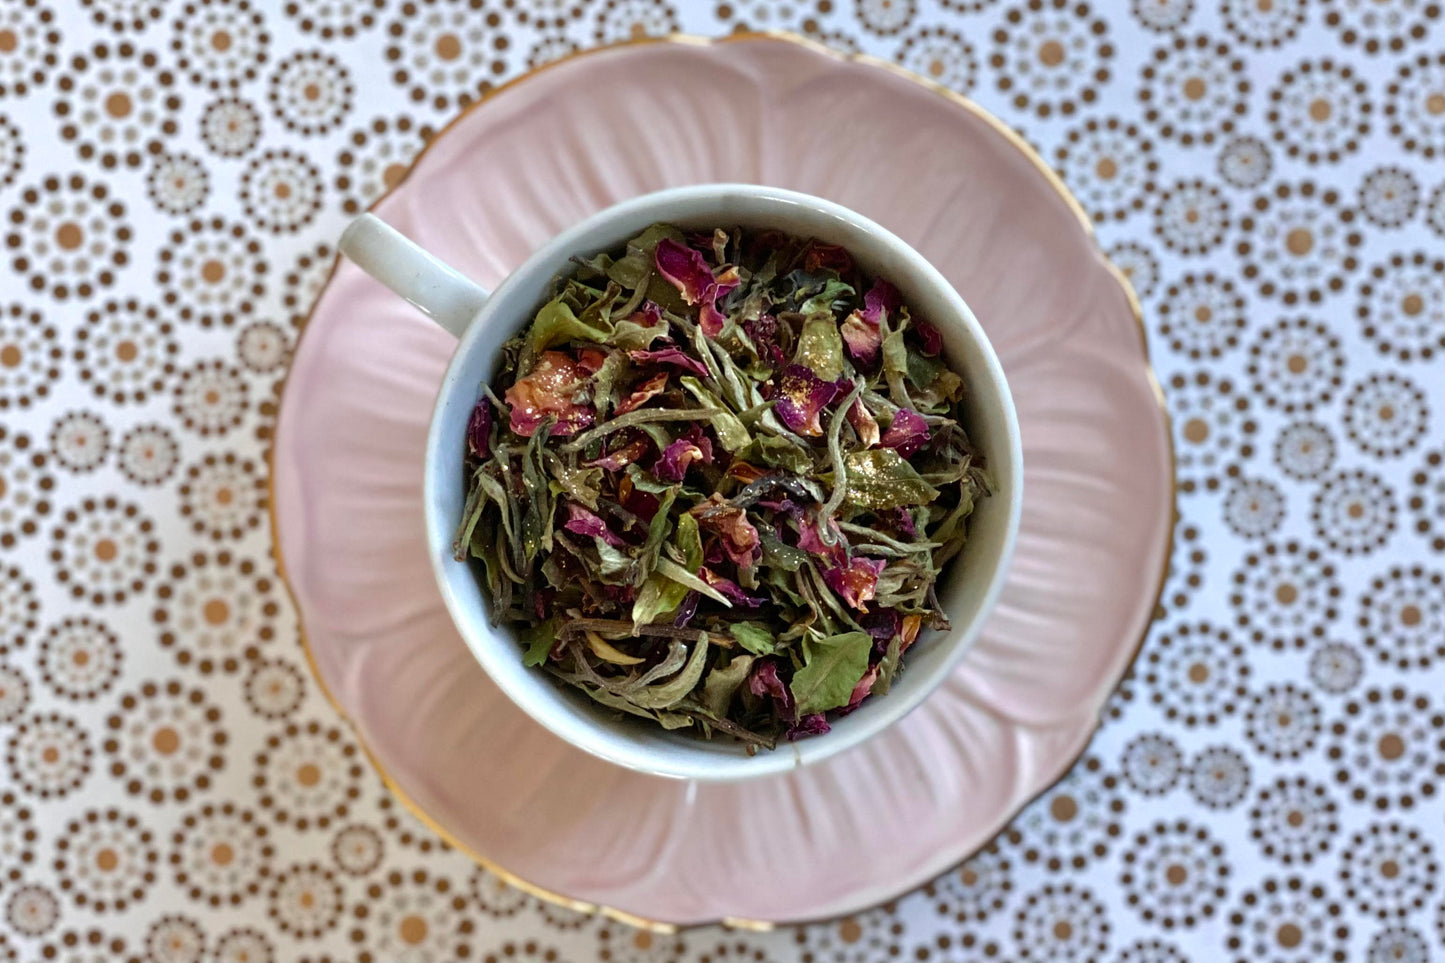 teacup full of white tea with rose petals and gold glitter